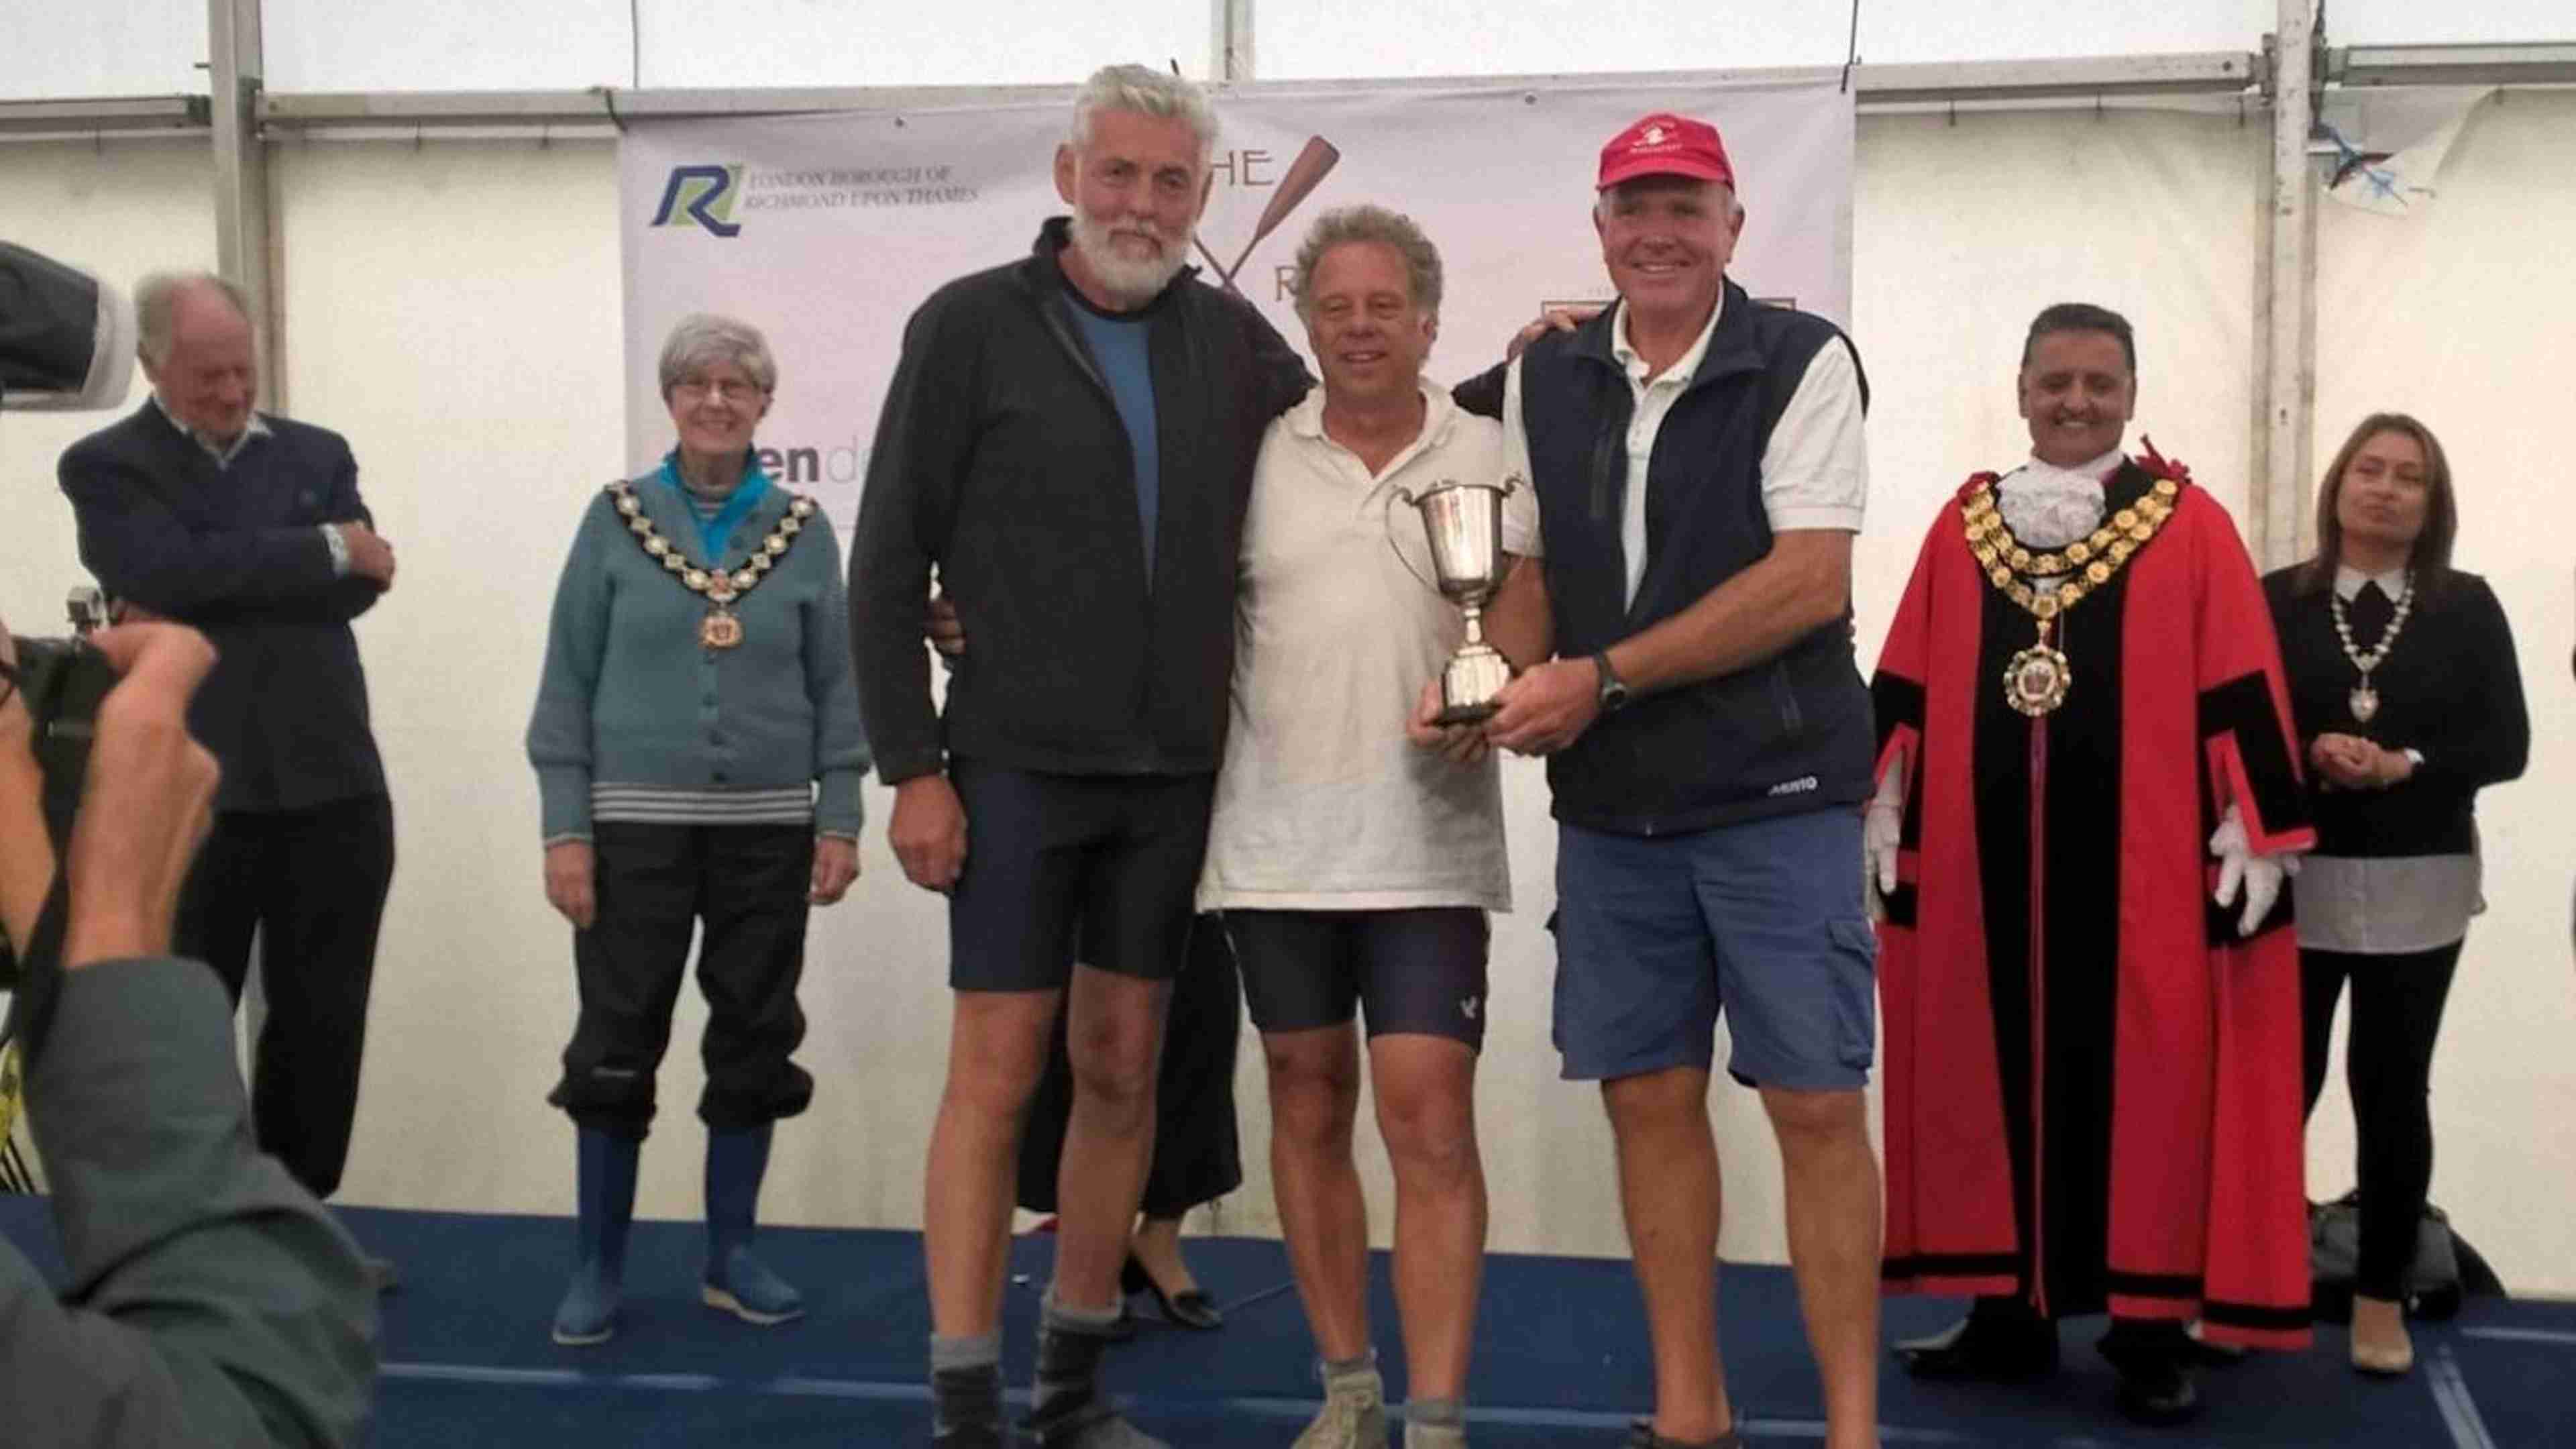 Brendan Sullivan, Keith Paxman and Will Langton with the Great River Race Trophy for Veteran (over 60) crews.